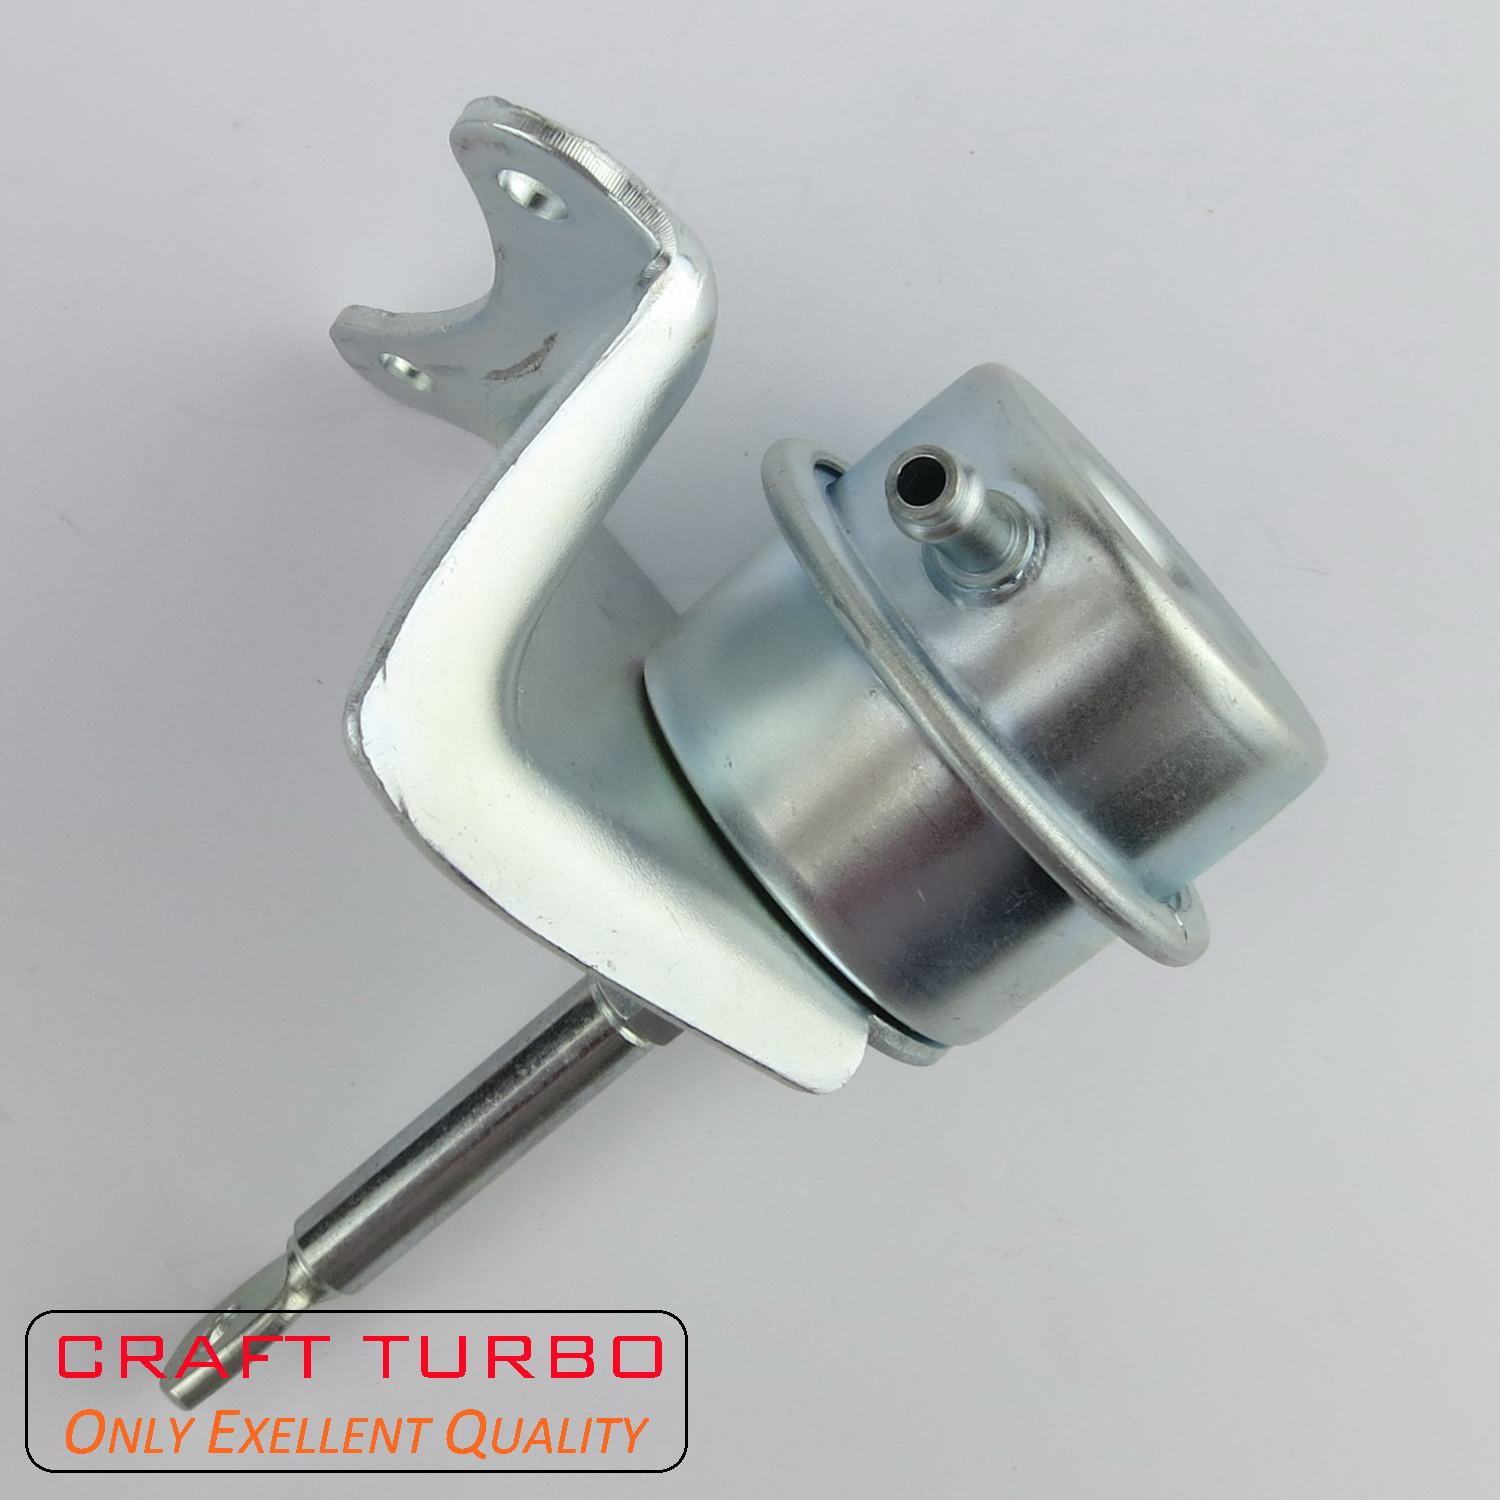 GT25 704090-0001 Actuator for Turbochargers